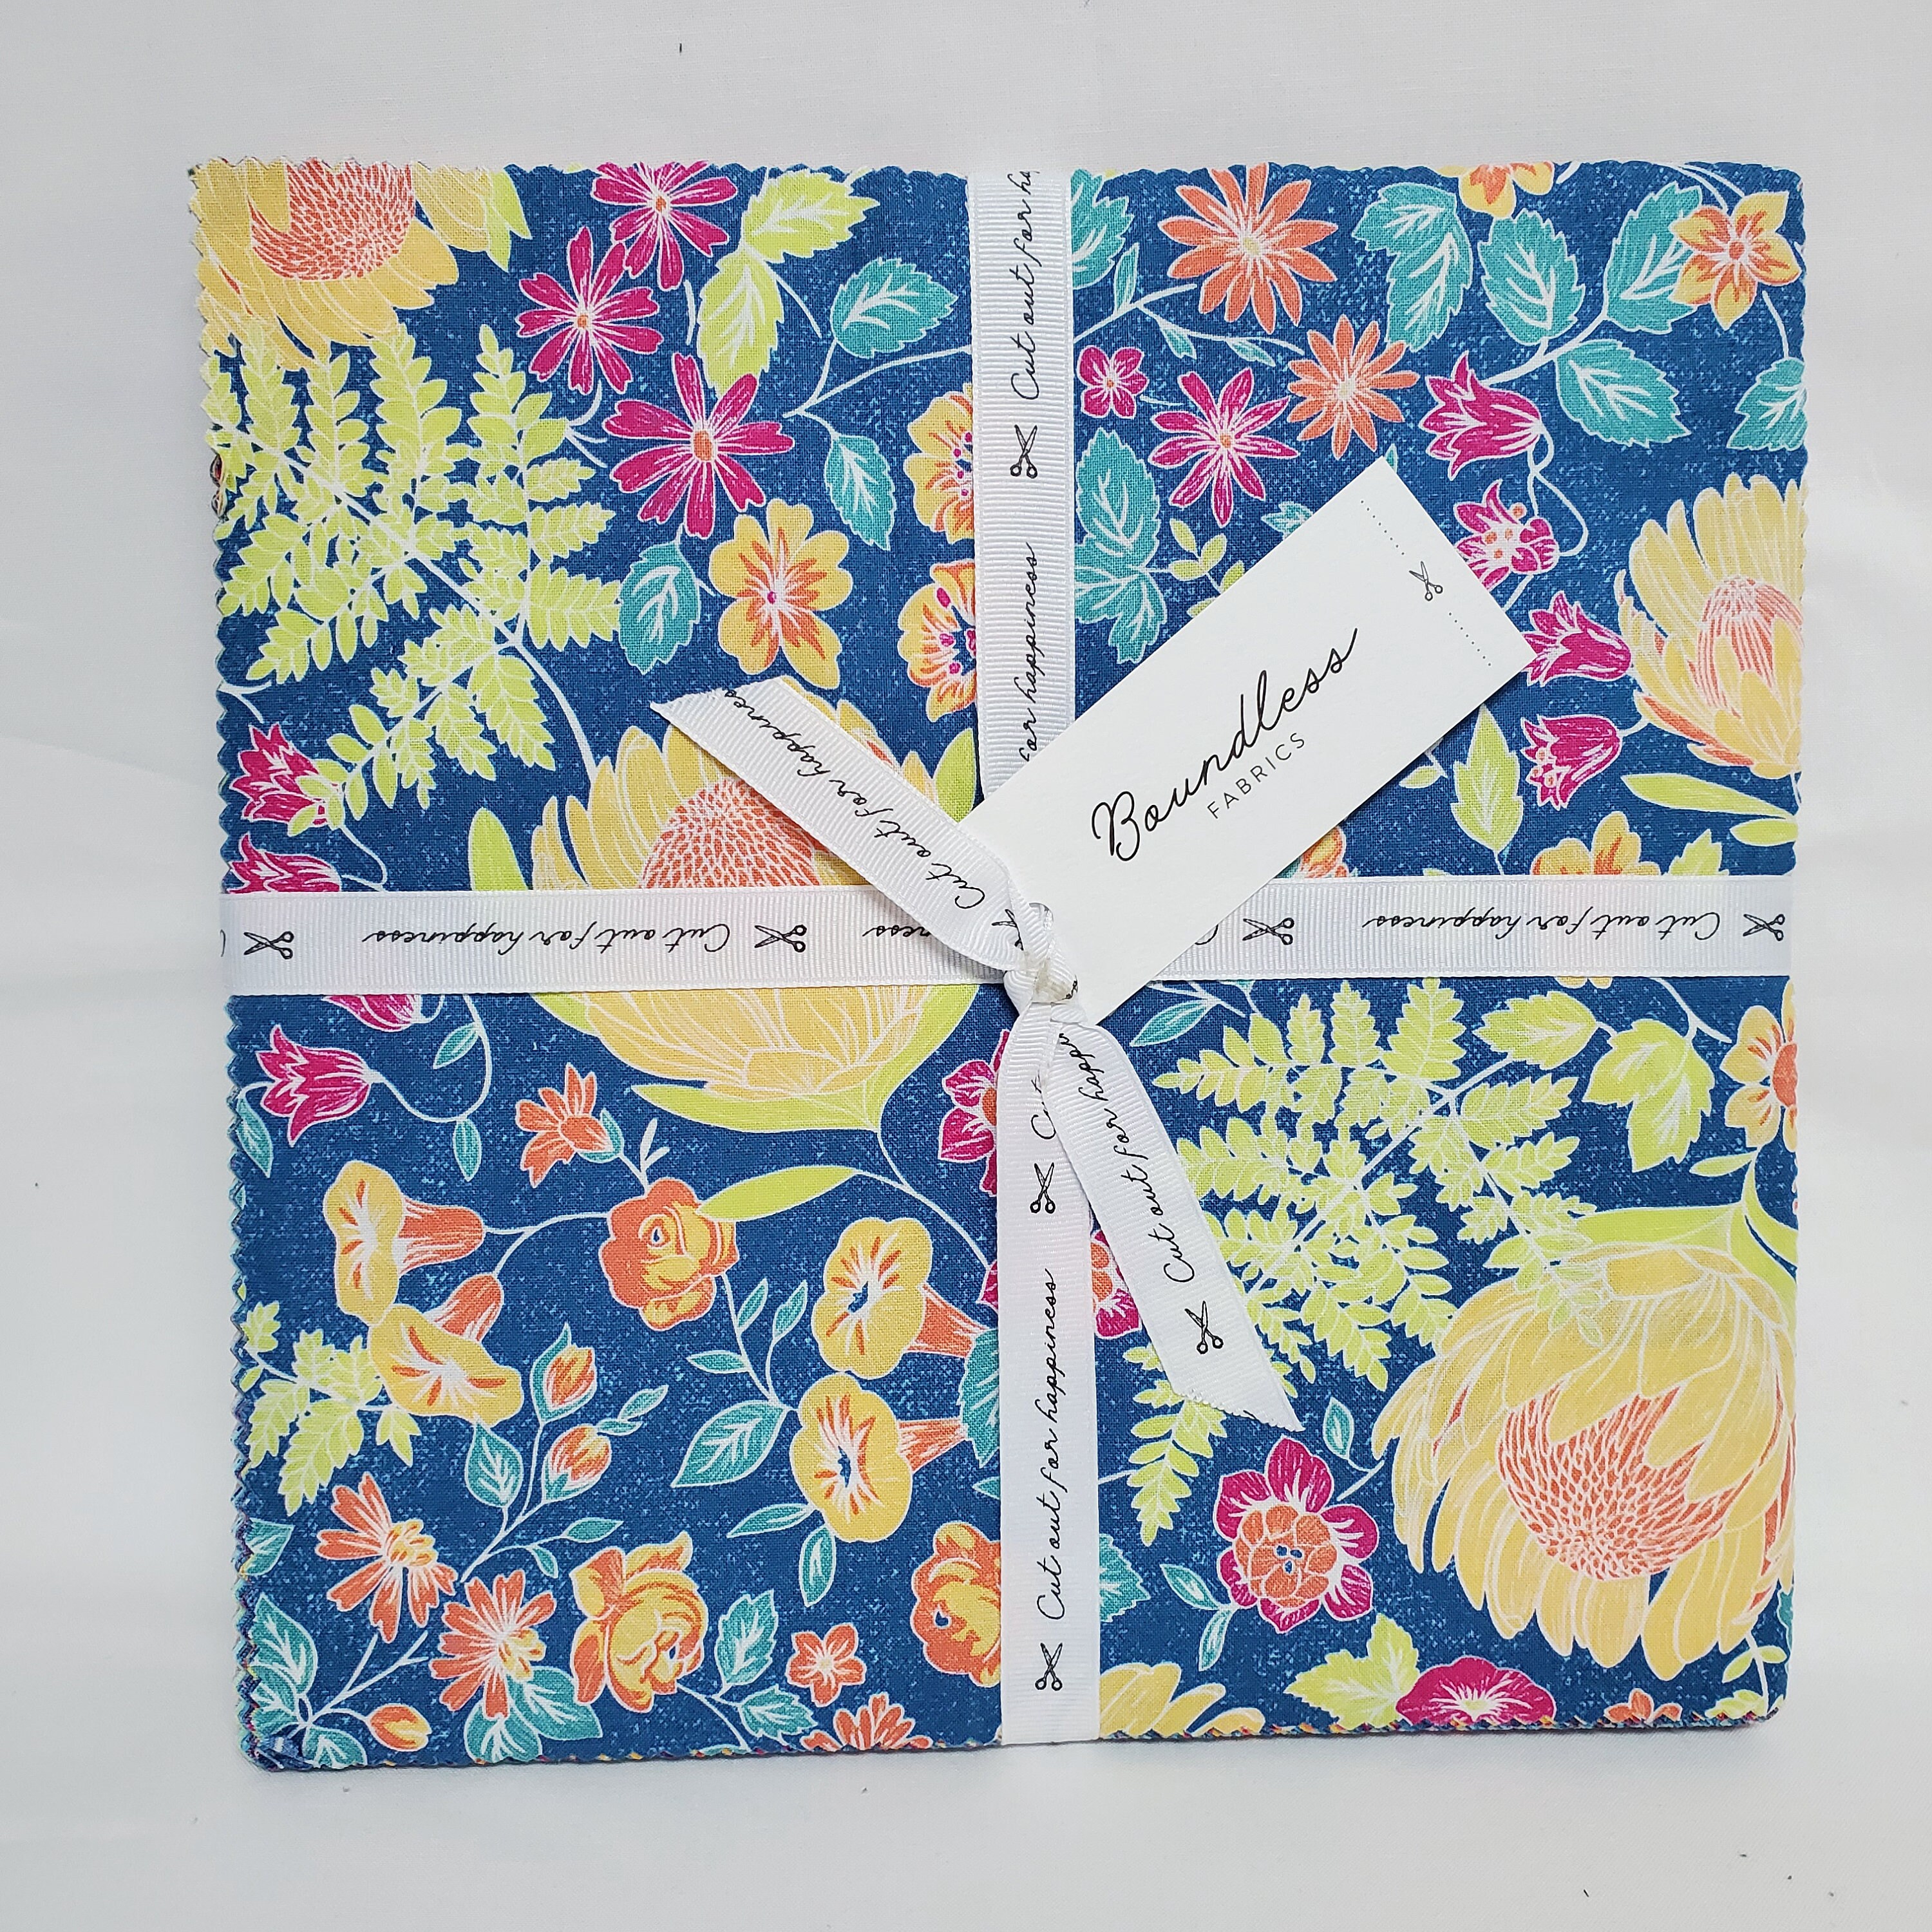 Boundless 10" Layer Cakes Nectar Cotton Fabric by the Bundle 